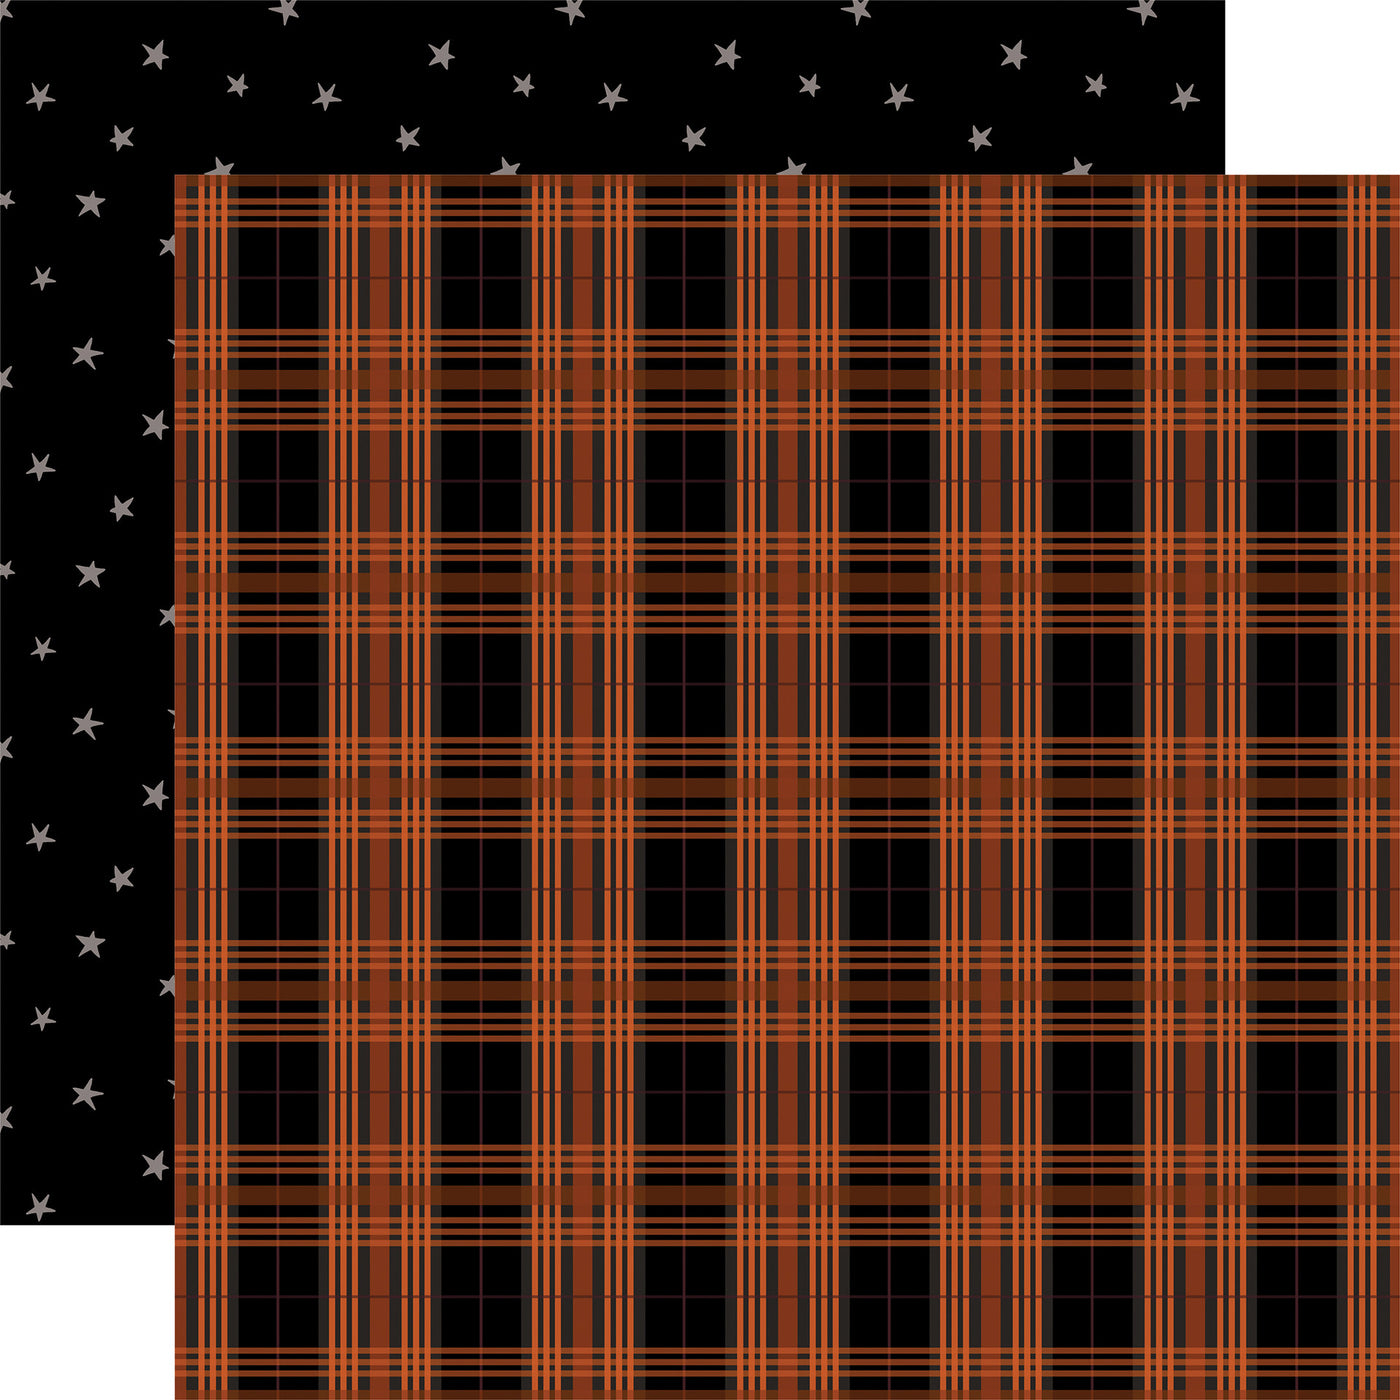 Double-sided 12x12 cardstock. (Side A - orange plaid on a black background, and Side B - gray stars scattered on a black background) Acid-free